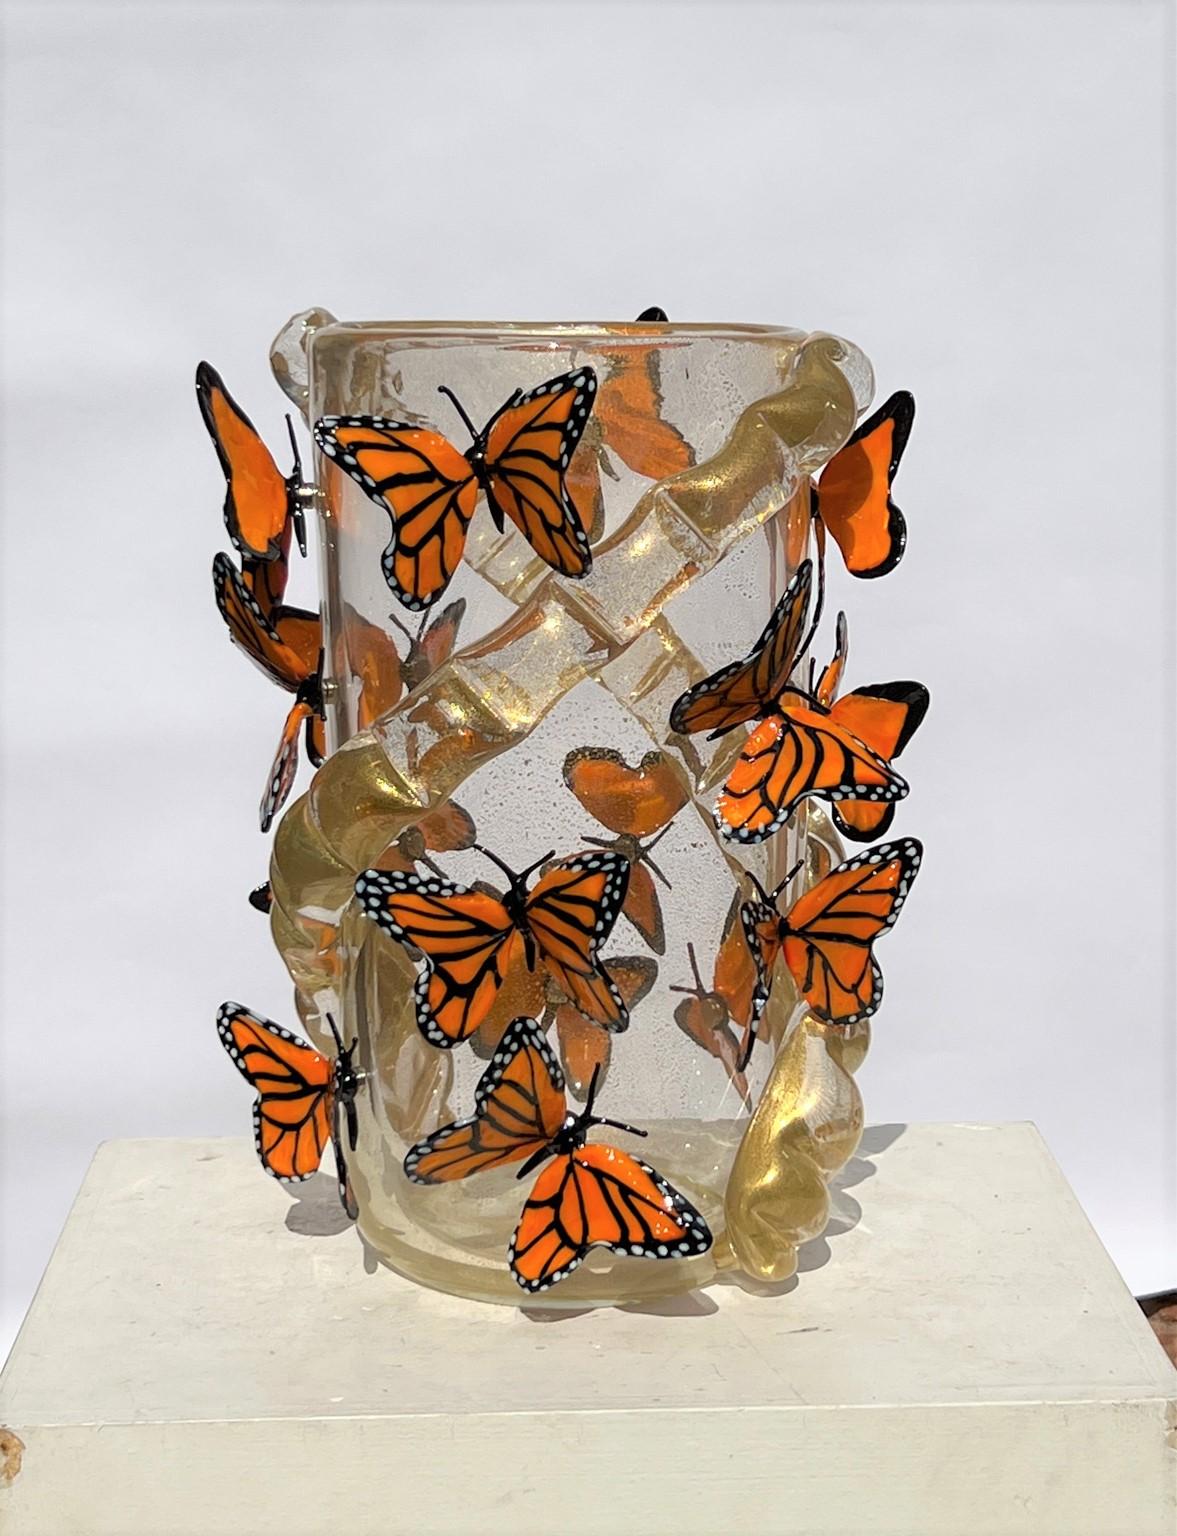 Handmade Murano glass blown vase with real 24kt gold leaf and Monarch butterflies attached with magnet. The vase contains 16 Monarch butterflies
Modern vase ideal for a modern and rustic classic environment, for everyone. This work was carried out